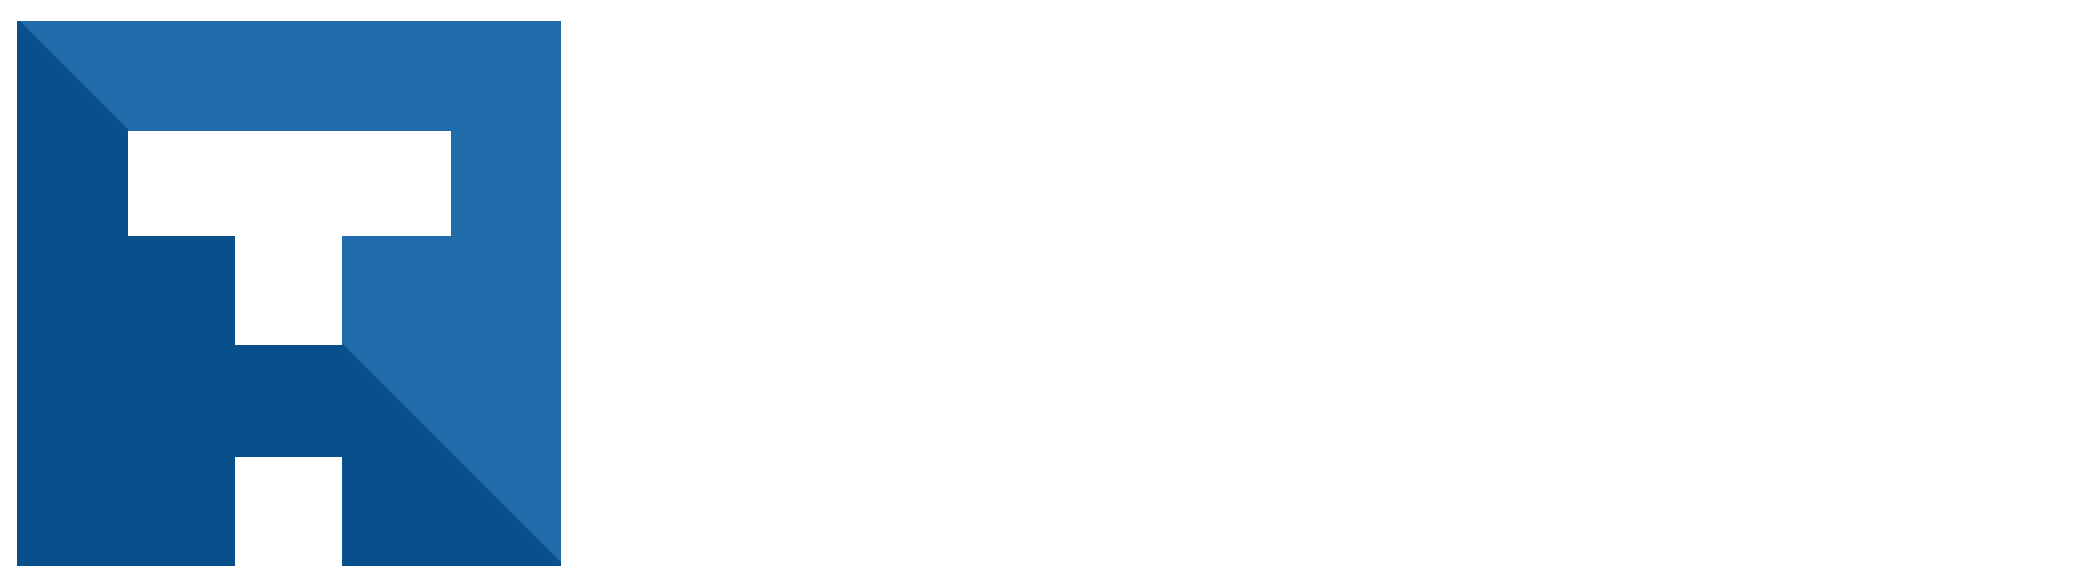 THEN CAPITAL